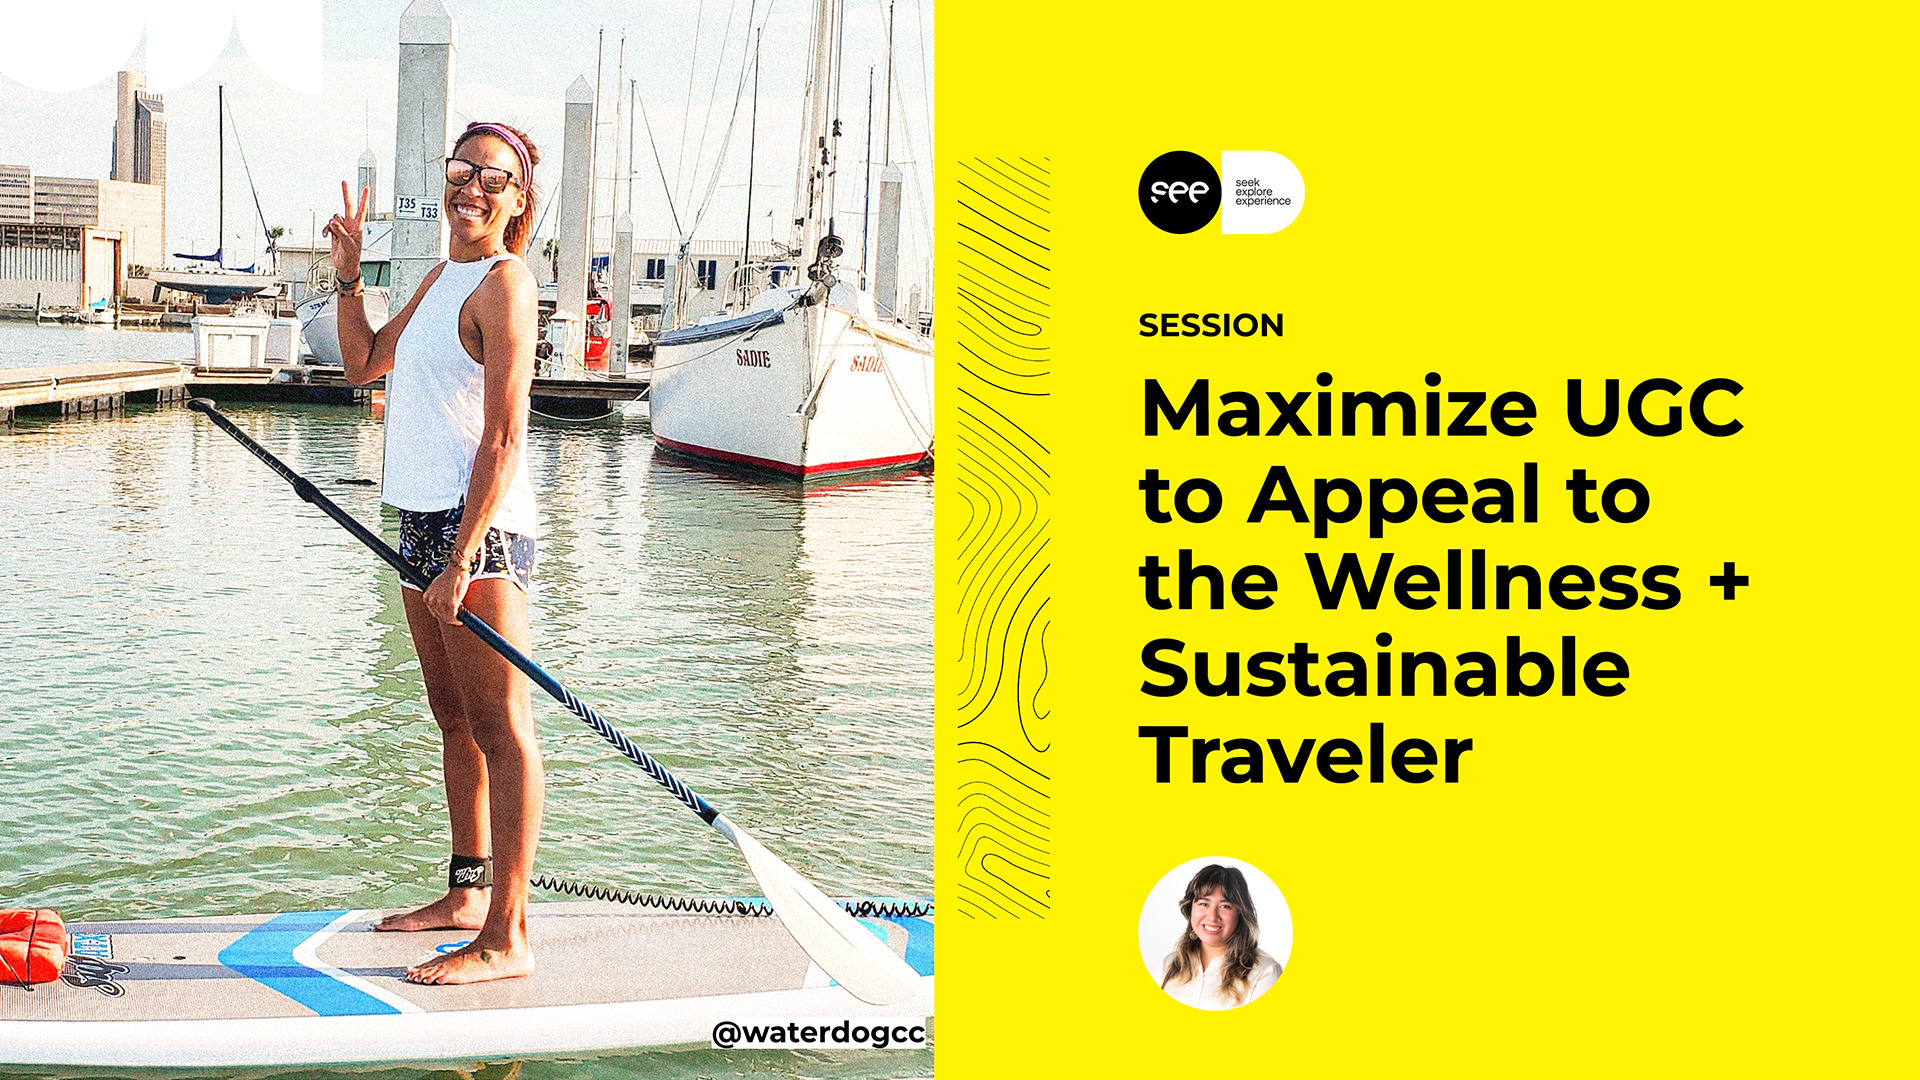  Maximize UGC to Appeal to the Sustainable and Wellness Traveler